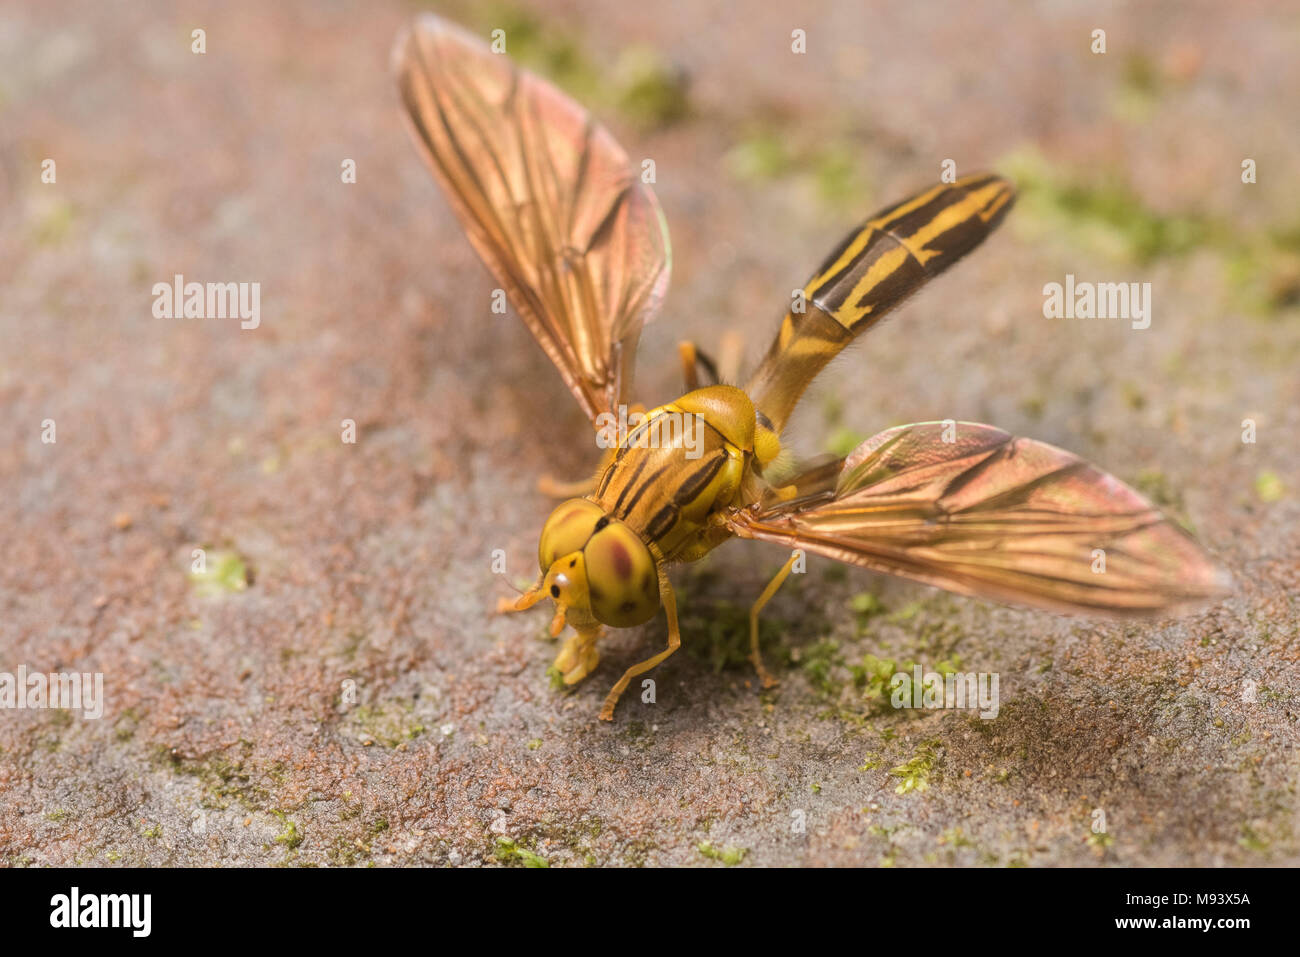 A tropical hover fly from Peru. Stock Photo